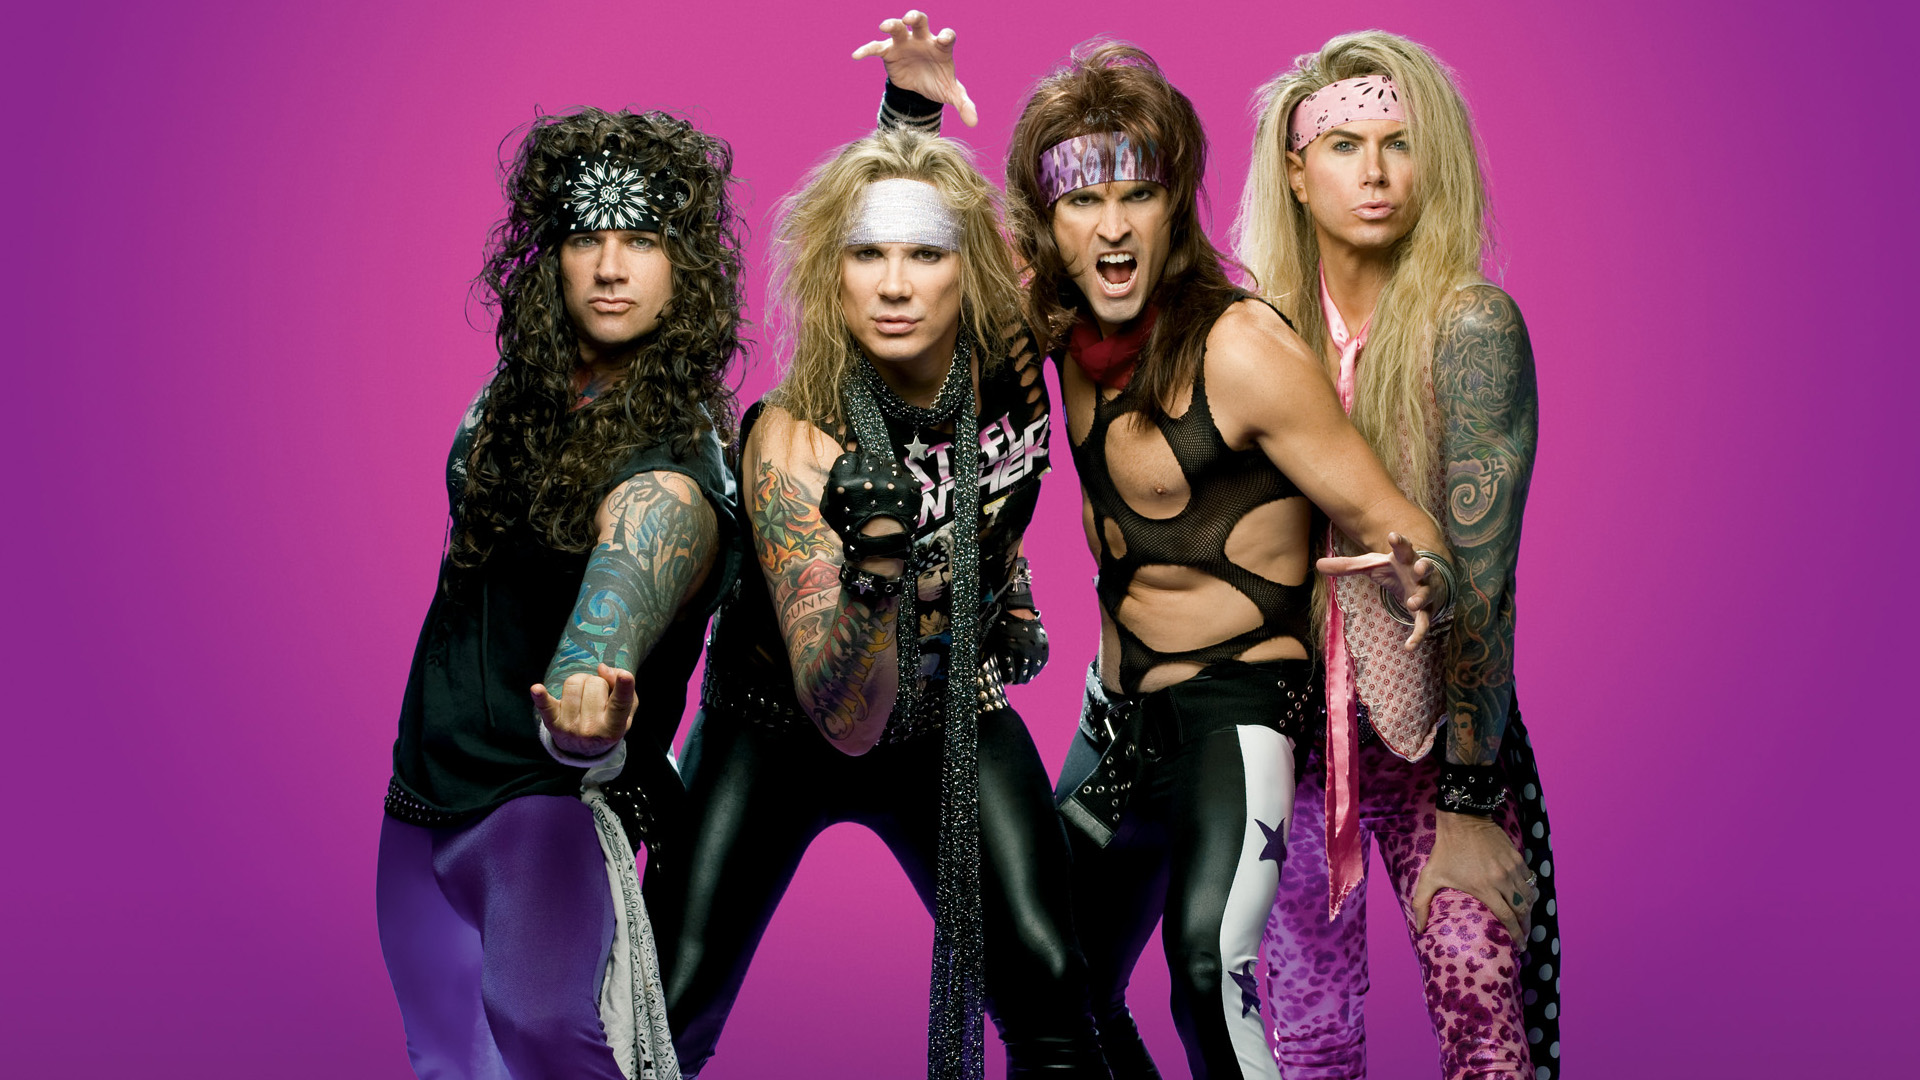 1920x1080 > Steel Panther Wallpapers